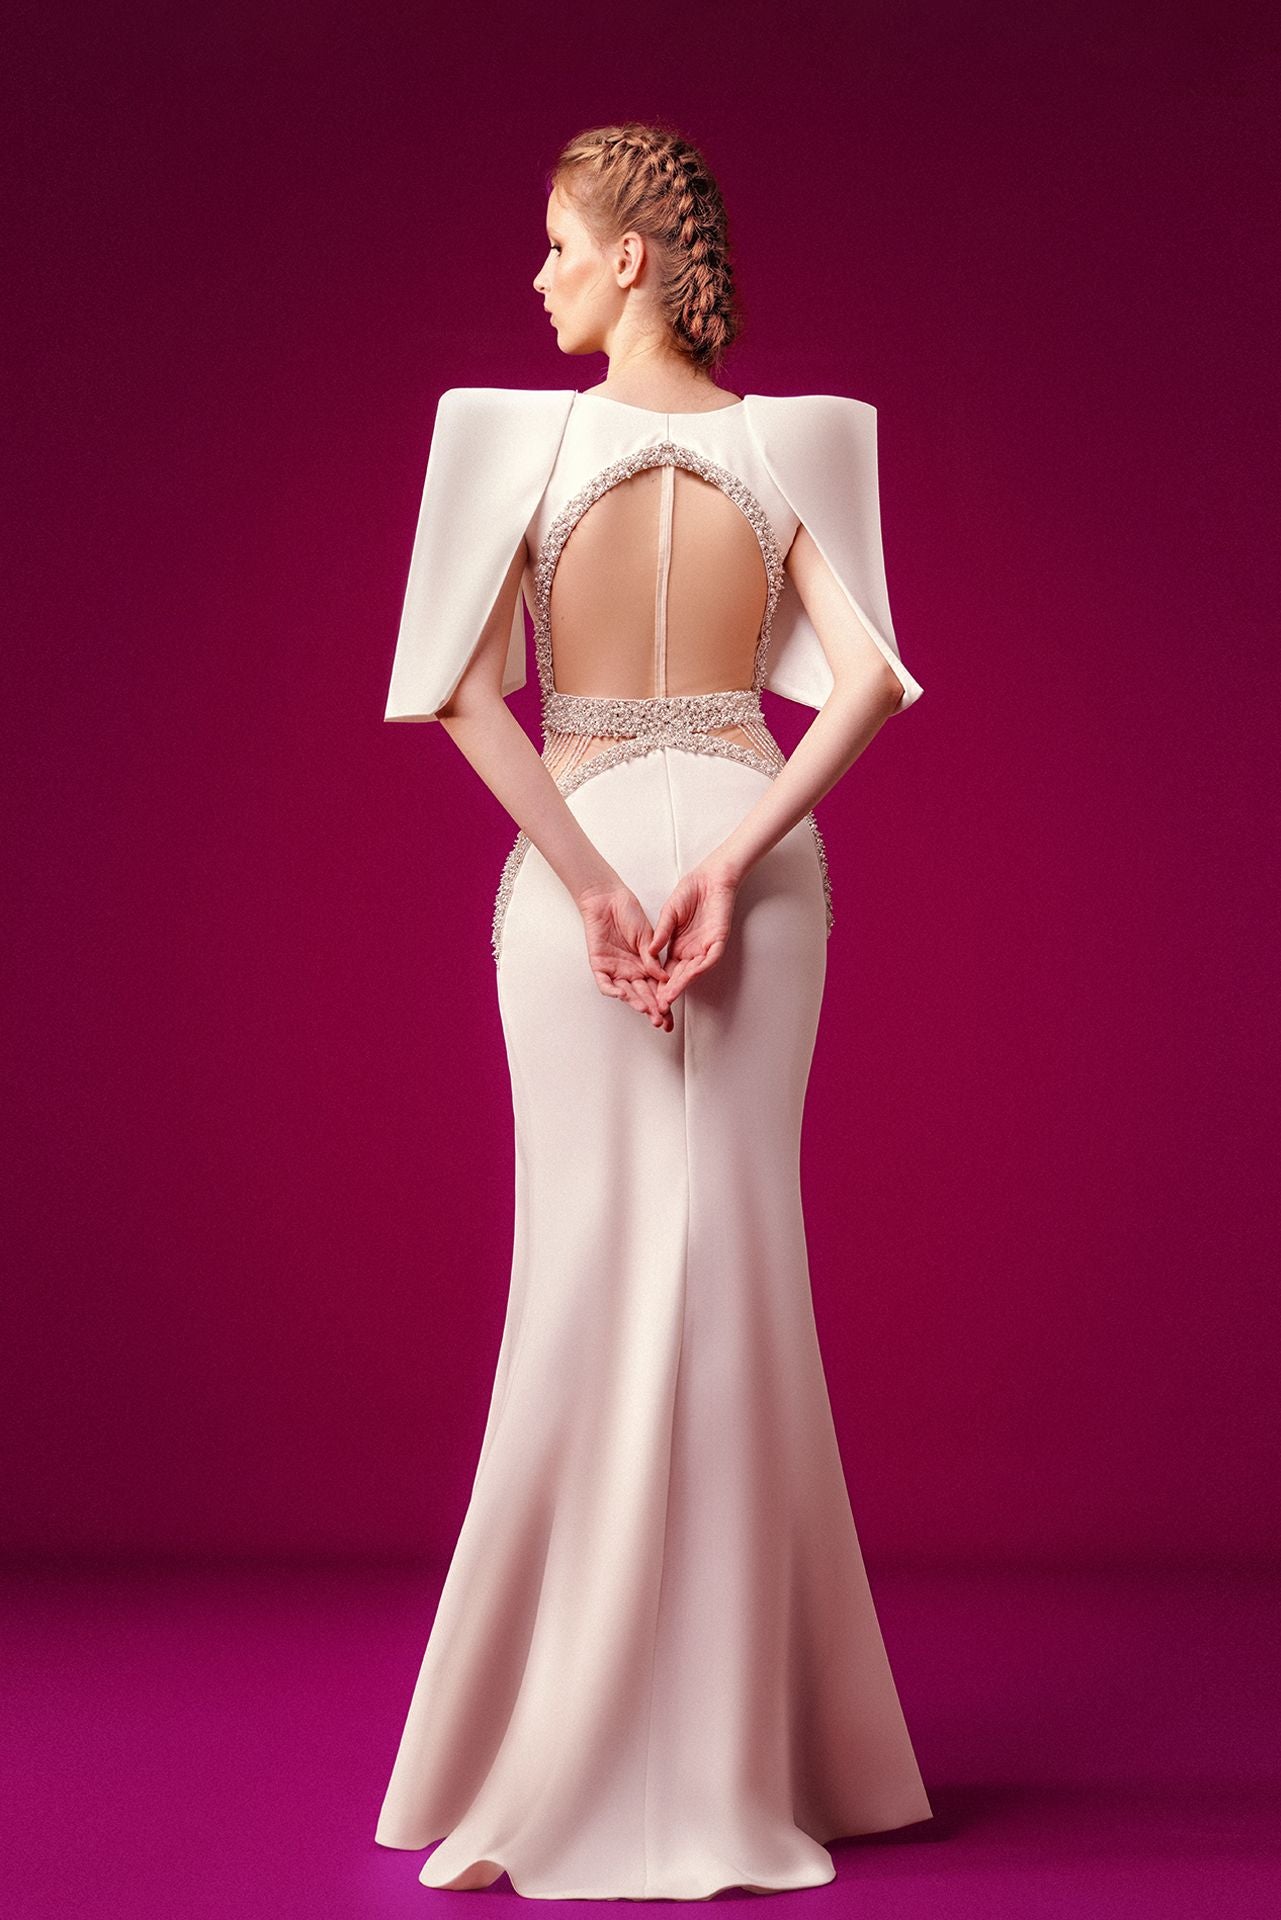 Crepe gown featuring band belt Swarovski crystals